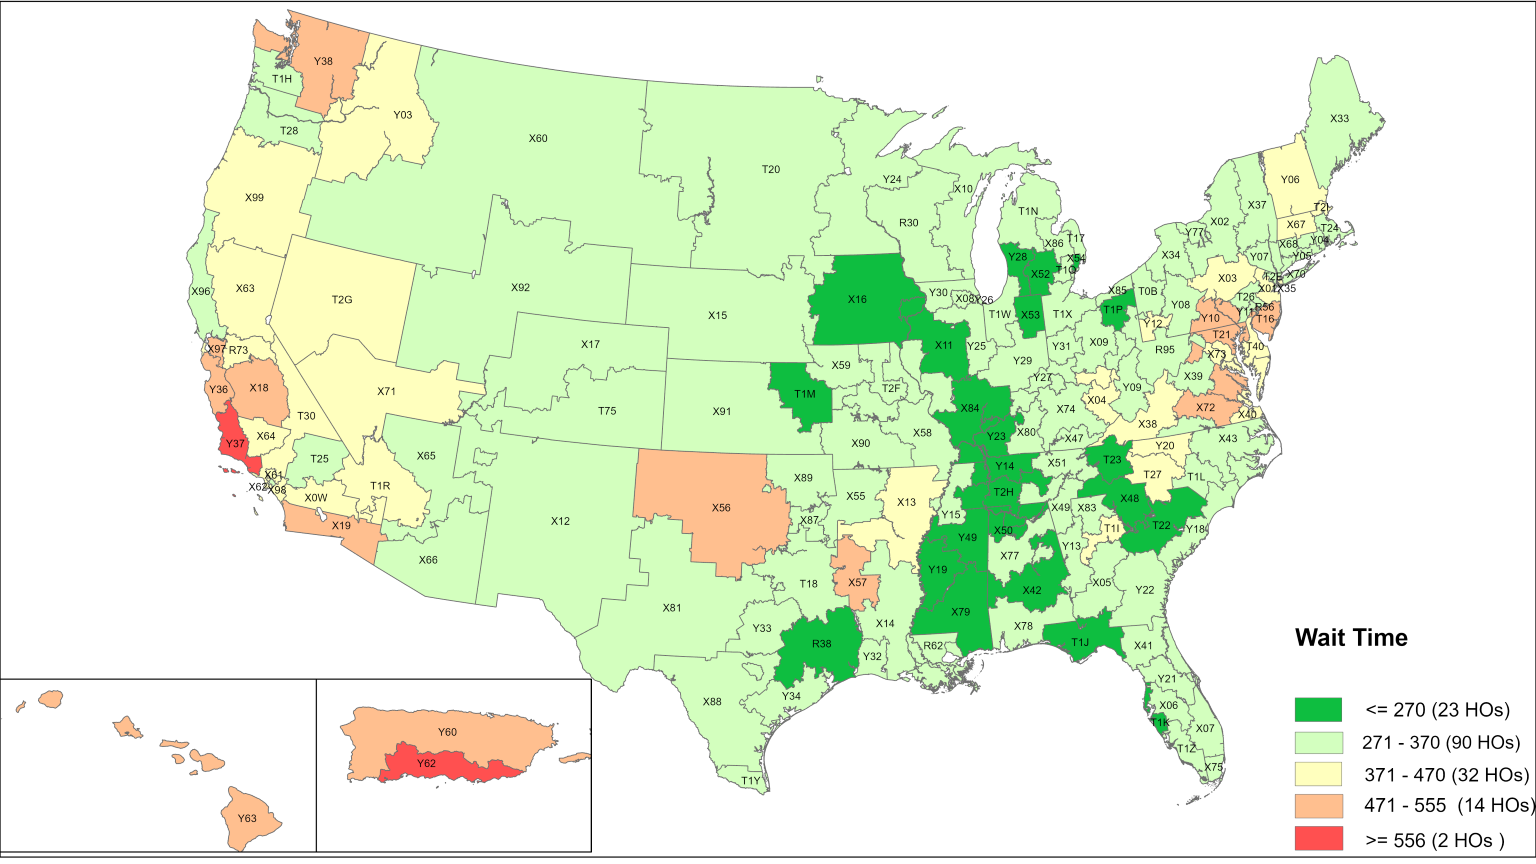 Heat map of the United States showing the average hearing wait times as of April 2024. The majority of hearing offices have an average wait time of less than 370 days, and 2 hearing offices have a wait time higher than 556 days.